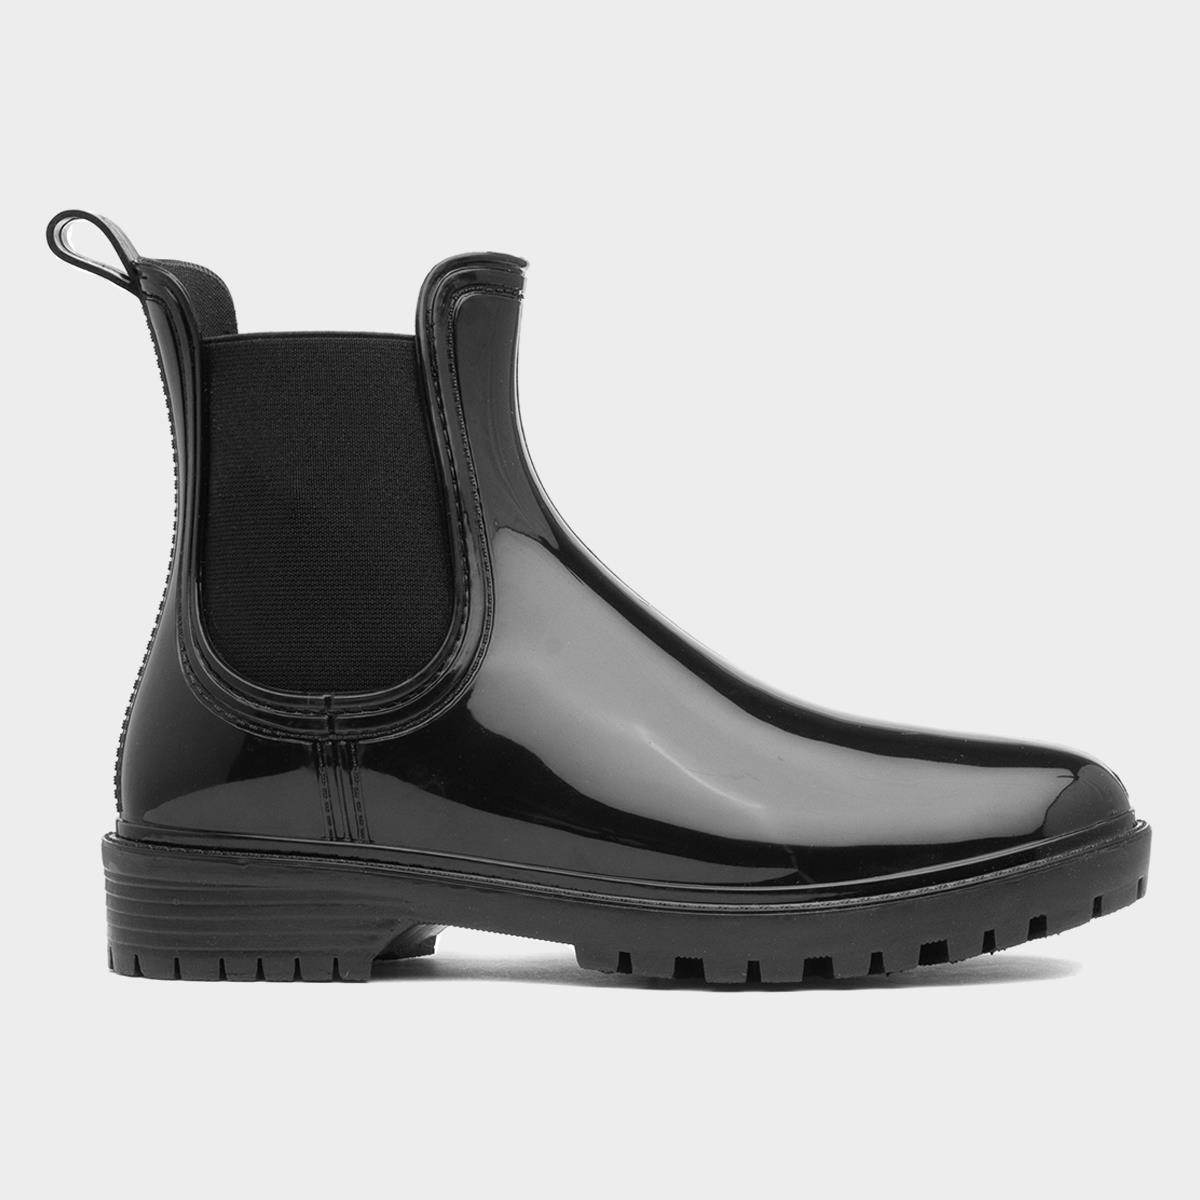 Lilley Gale Womens Black Chelsea Welly-799279 | Shoe Zone